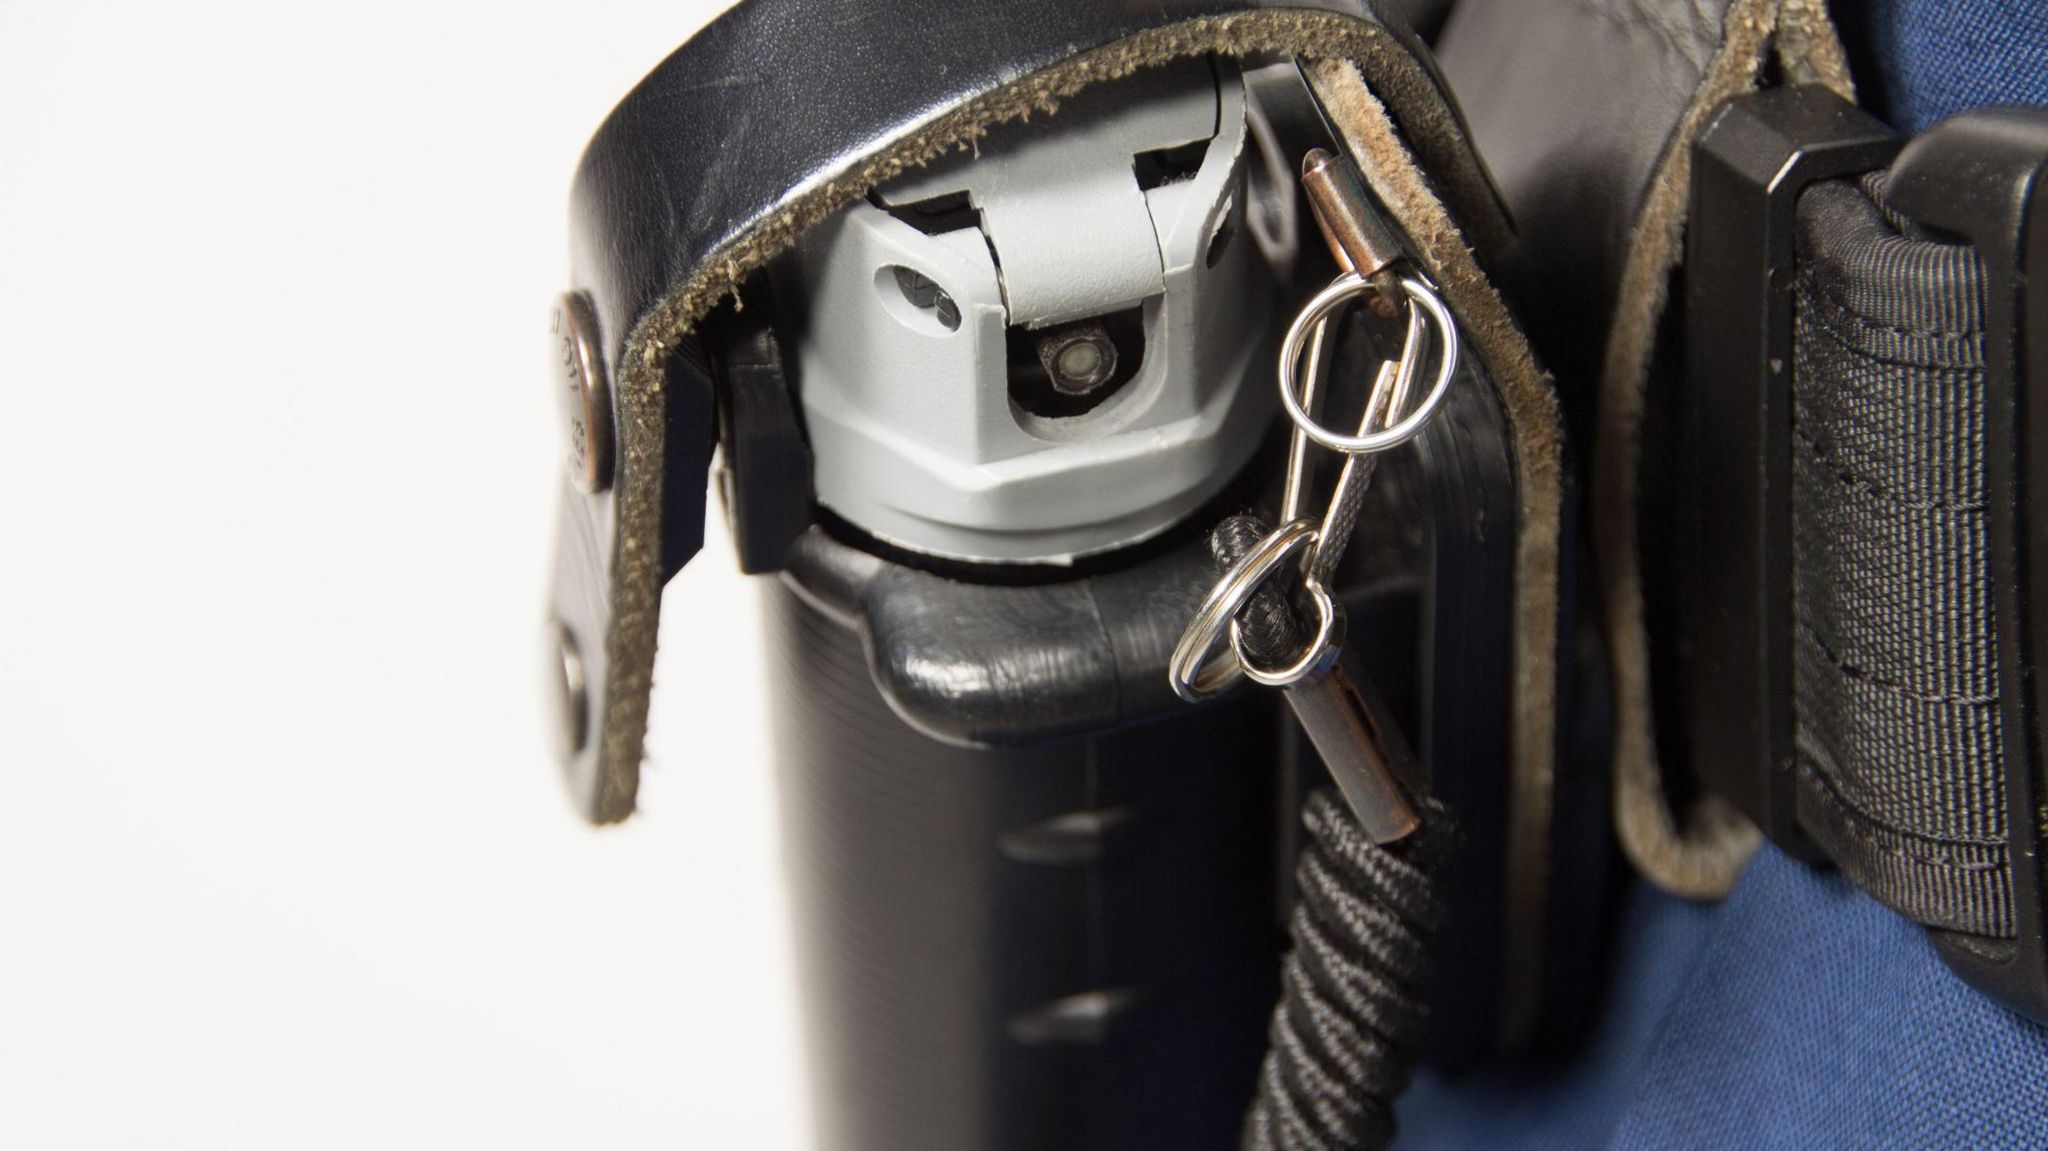 PAVA spray in a holster on a police officer's belt